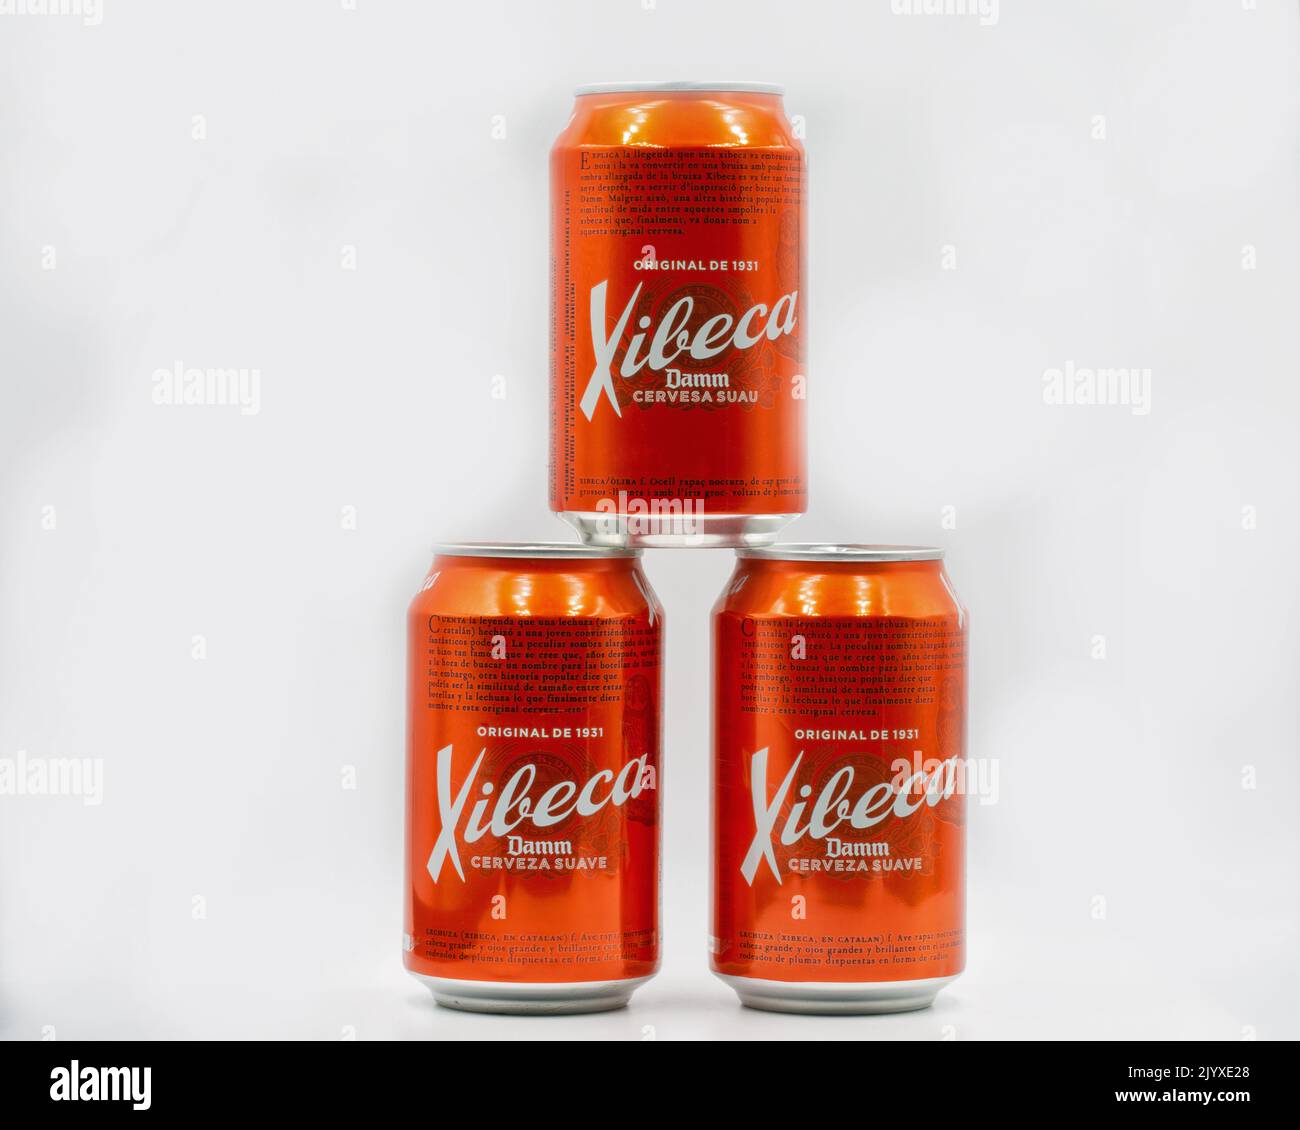 Kyiv, Ukraine - June 10, 2021: Studio shoot of Spanish beer Xibeca cans from manufacturer Barcelona brewery S.A. Damm closeup on white. It produced an Stock Photo